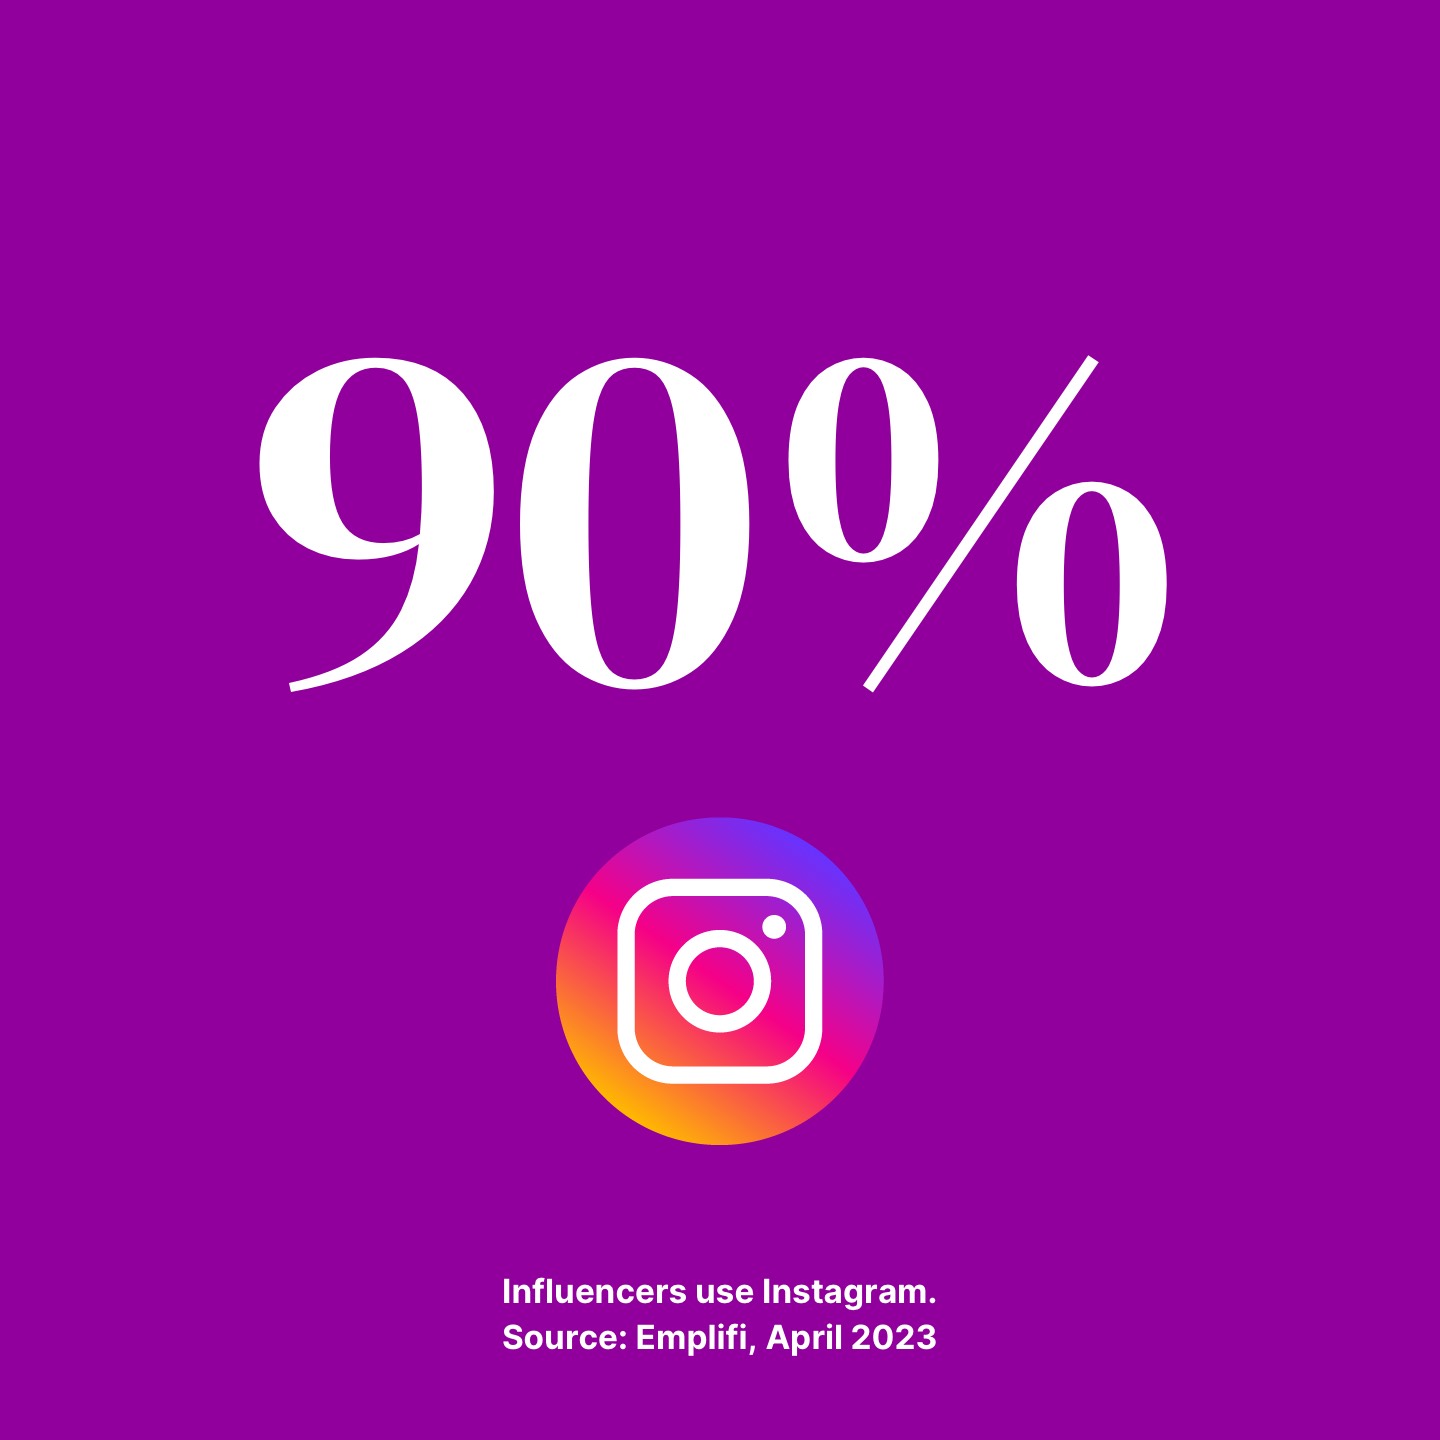 90% of influencers use Instagram